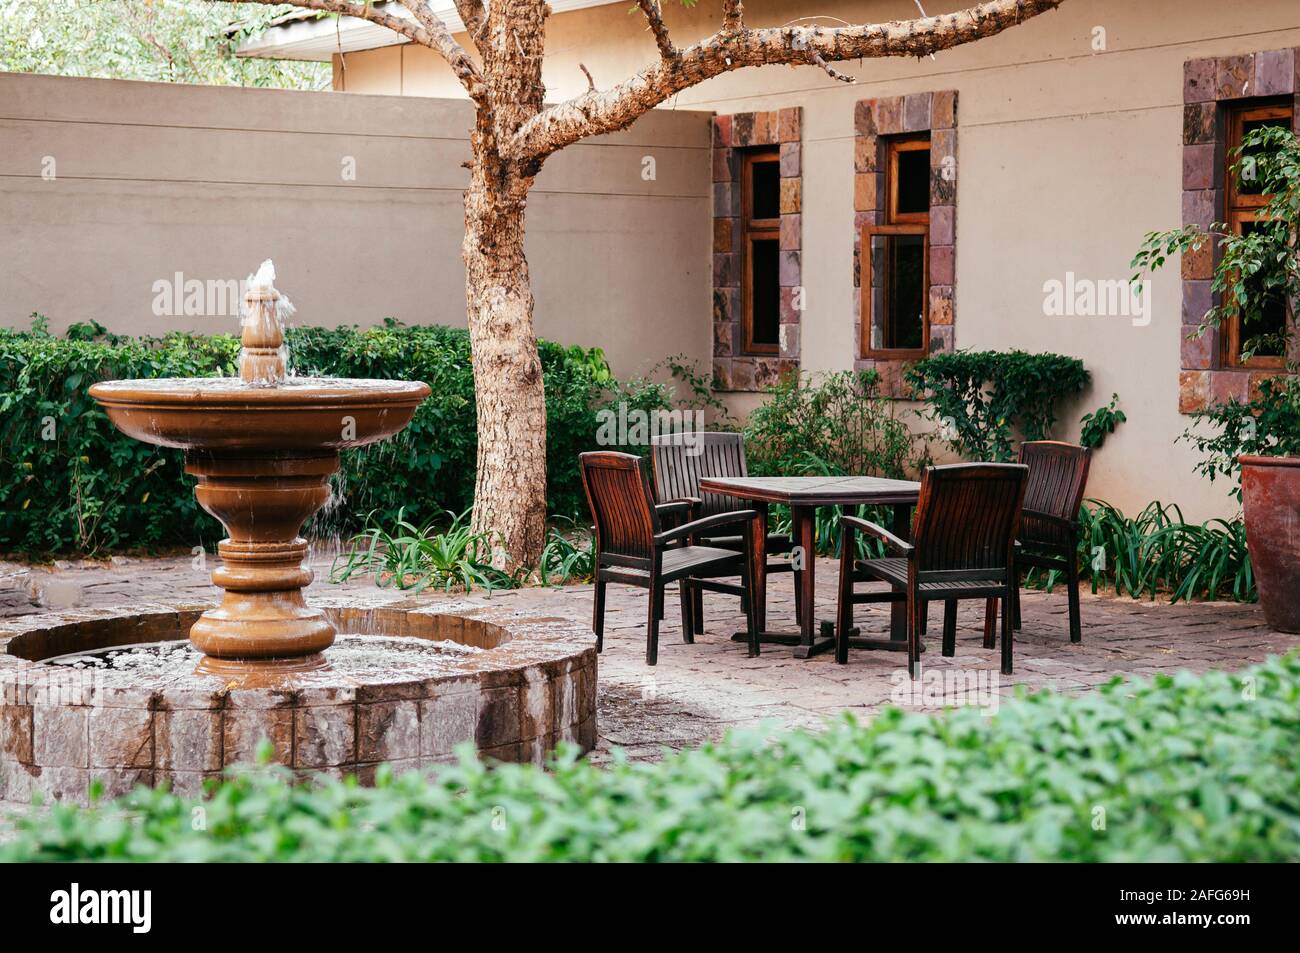 Jun 19 2011 Serengeti Tanzania Fountain And Old Wooden Chairs And Table Set In Tropical Backyard Garden Under Tree With Green Shrubs Under Natu Stock Photo Alamy